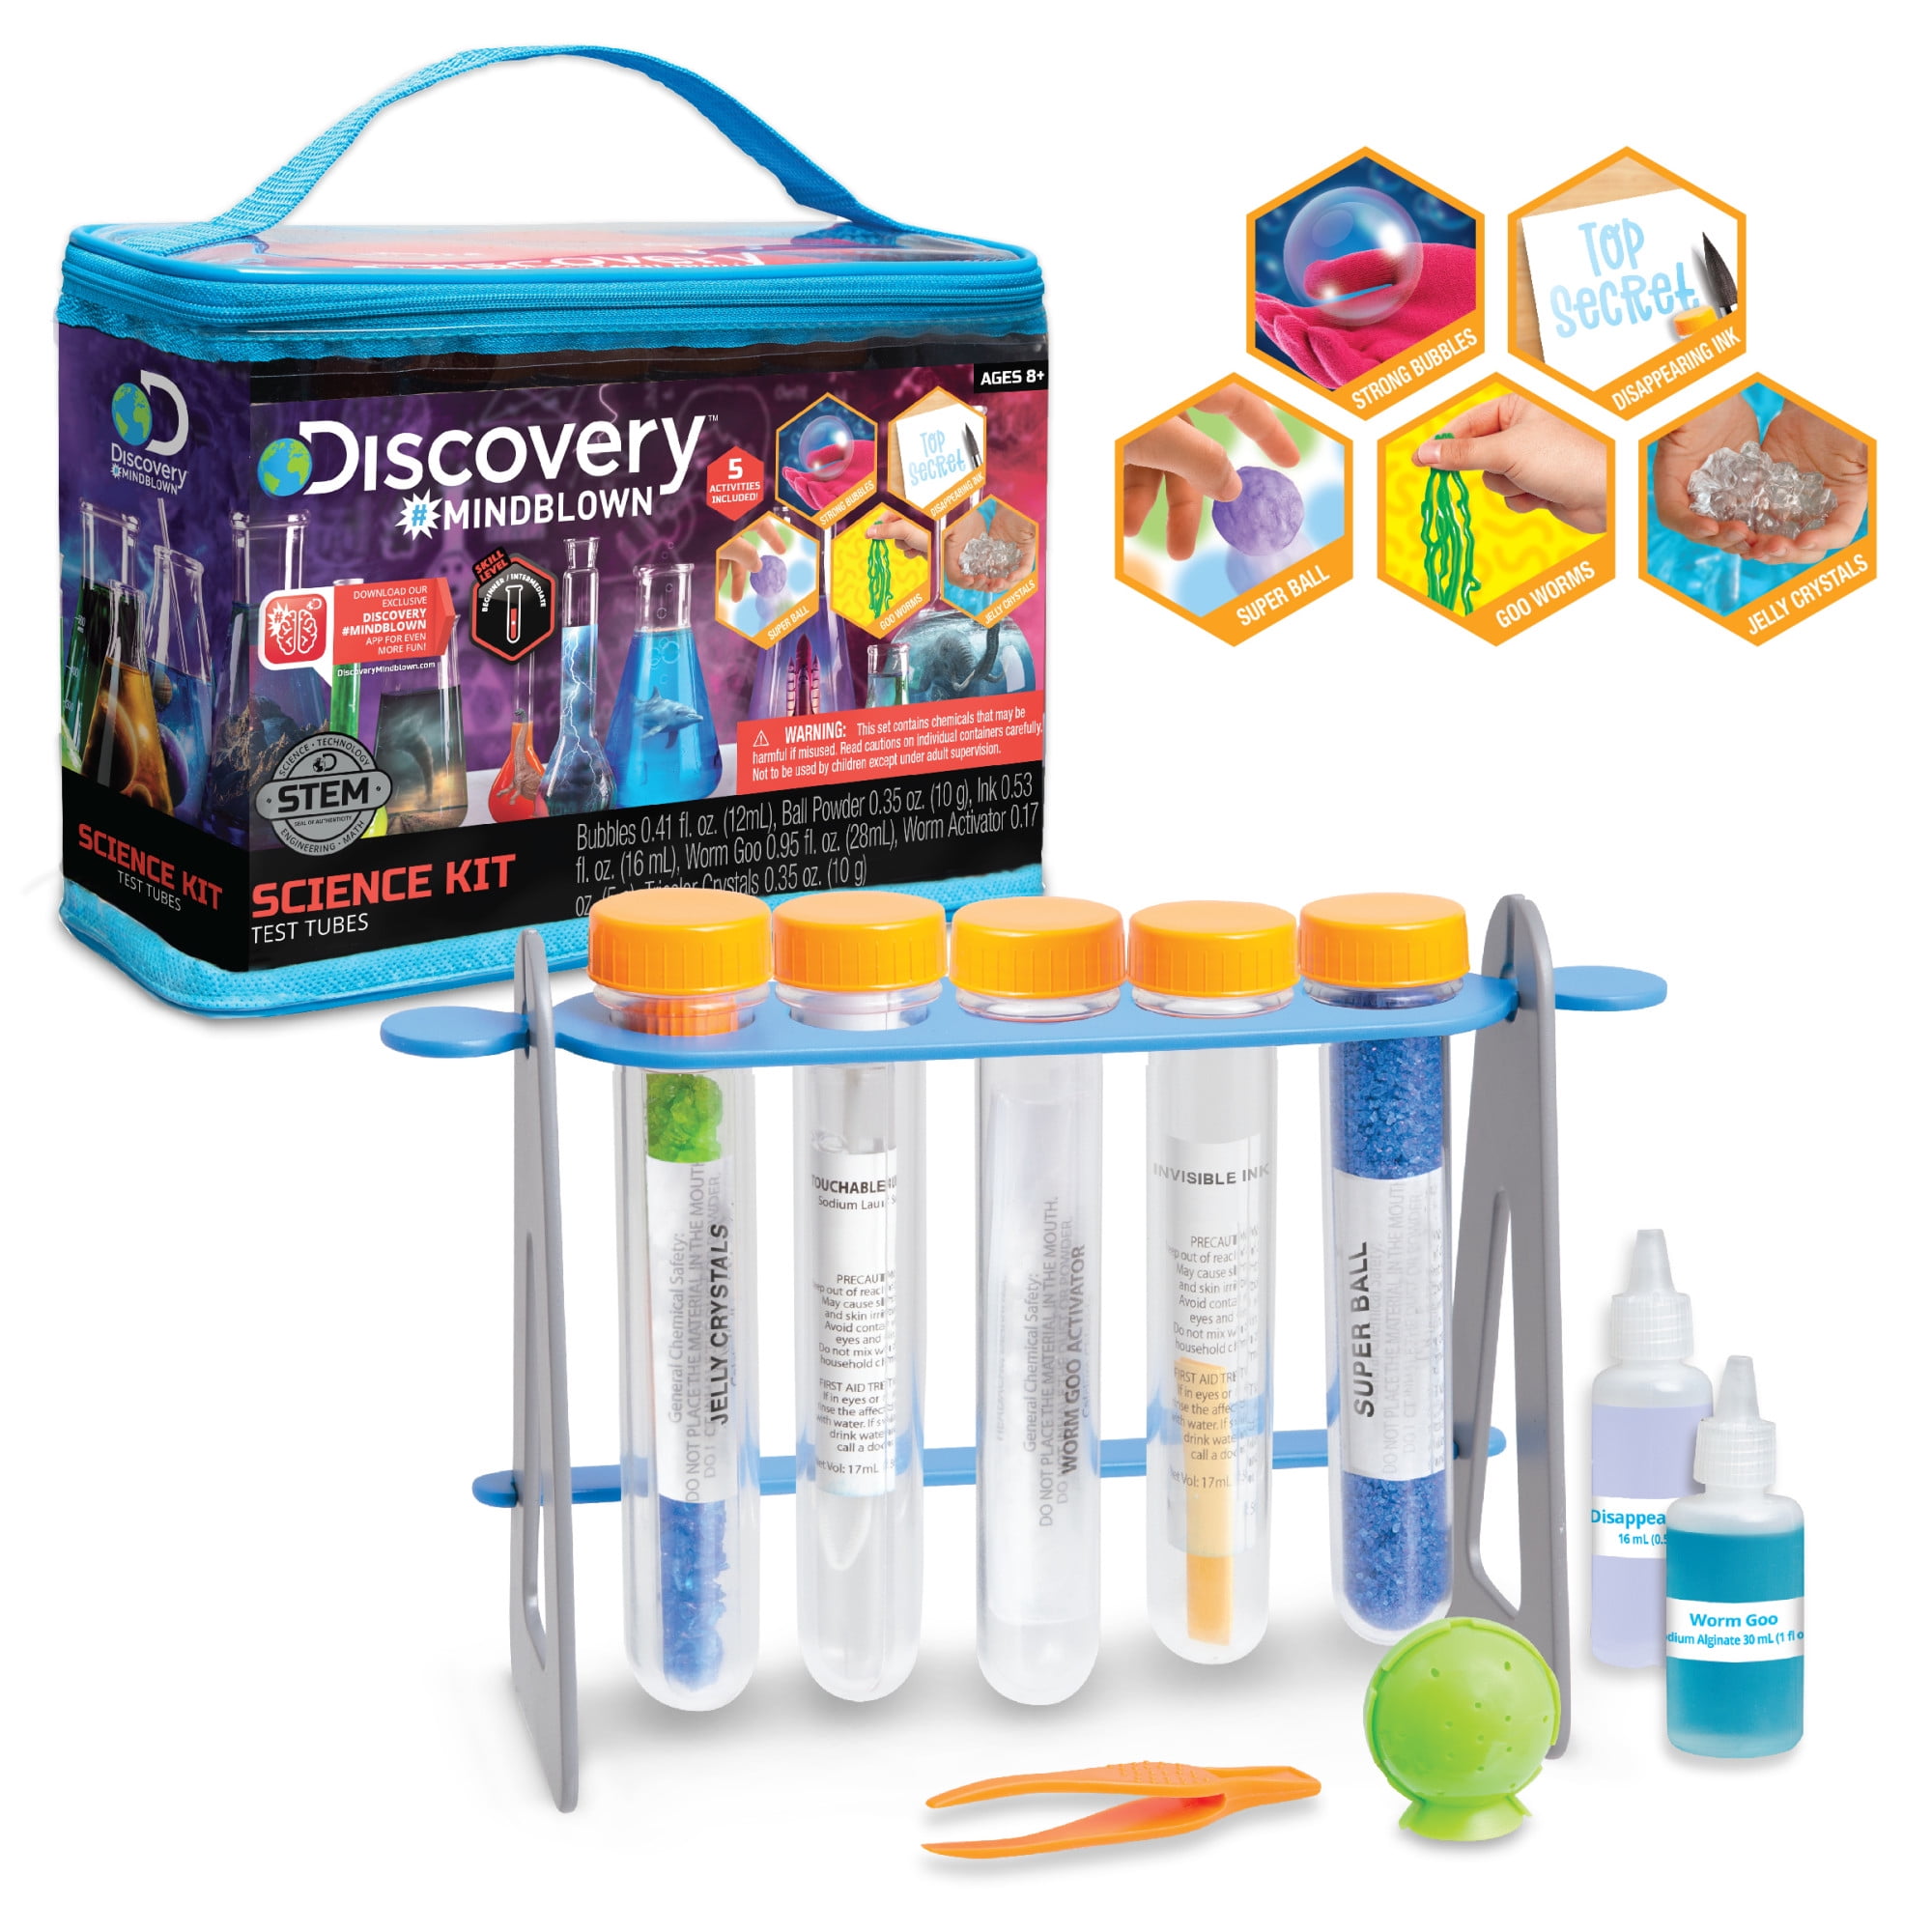 16 Exciting Chemistry Experiments Great Gift for Kids... Science Kit for Kids 